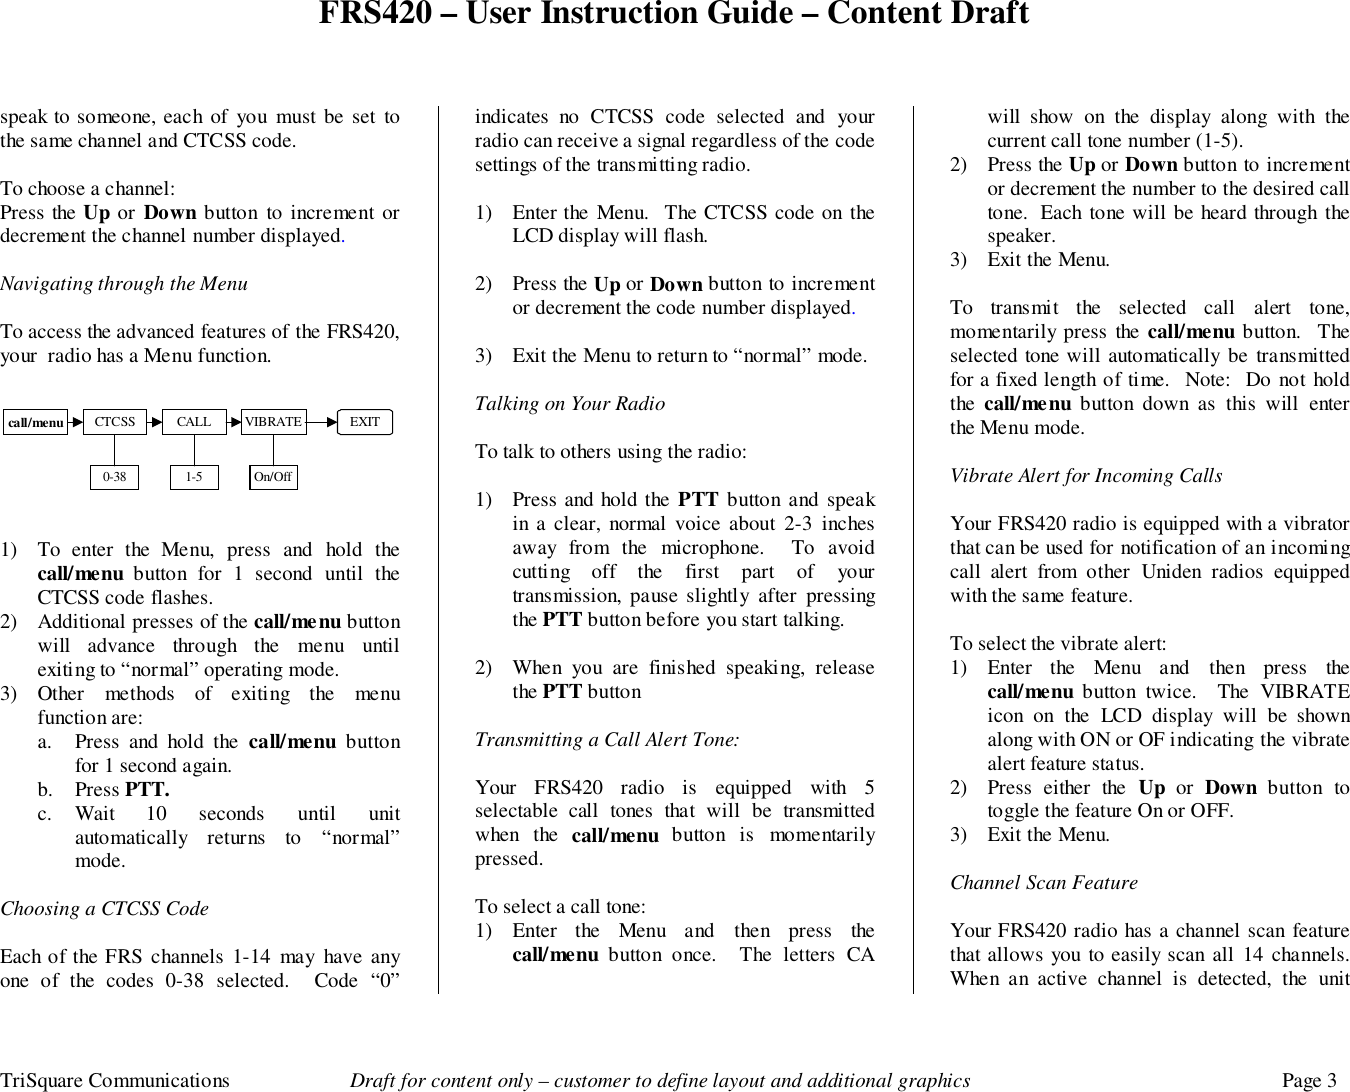 FRS420 – User Instruction Guide – Content DraftTriSquare Communications Draft for content only – customer to define layout and additional graphics Page 3speak to someone, each of you must be set tothe same channel and CTCSS code.To choose a channel:Press the Up or Down button to increment ordecrement the channel number displayed.  Navigating through the MenuTo access the advanced features of the FRS420,your  radio has a Menu function.1) To enter the Menu, press and hold thecall/menu button for 1 second until theCTCSS code flashes.2) Additional presses of the call/menu buttonwill advance through the menu untilexiting to “normal” operating mode.3) Other methods of exiting the menufunction are:a. Press and hold the call/menu buttonfor 1 second again.b. Press PTT.c. Wait 10 seconds until unitautomatically returns to “normal”mode.Choosing a CTCSS CodeEach of the FRS channels 1-14 may have anyone of the codes 0-38 selected.  Code “0”indicates no CTCSS code selected and yourradio can receive a signal regardless of the codesettings of the transmitting radio.1) Enter the Menu.  The CTCSS code on theLCD display will flash.2) Press the Up or Down button to incrementor decrement the code number displayed.  3) Exit the Menu to return to “normal” mode.Talking on Your RadioTo talk to others using the radio:1) Press and hold the PTT button and speakin a clear, normal voice about 2-3 inchesaway from the microphone.  To avoidcutting off the first part of yourtransmission, pause slightly after pressingthe PTT button before you start talking.2) When you are finished speaking, releasethe PTT buttonTransmitting a Call Alert Tone:Your FRS420 radio is equipped with 5selectable call tones that will be transmittedwhen the call/menu  button is momentarilypressed.To select a call tone:1) Enter the Menu and then press thecall/menu  button once.  The letters CAwill show on the display along with thecurrent call tone number (1-5).2) Press the Up or Down button to incrementor decrement the number to the desired calltone.  Each tone will be heard through thespeaker.3) Exit the Menu.To transmit the selected call alert tone,momentarily press the call/menu button.  Theselected tone will automatically be transmittedfor a fixed length of time.  Note:  Do not holdthe  call/menu button down as this will enterthe Menu mode.Vibrate Alert for Incoming CallsYour FRS420 radio is equipped with a vibratorthat can be used for notification of an incomingcall alert from other Uniden radios equippedwith the same feature.To select the vibrate alert:1) Enter the Menu and then press thecall/menu  button twice.  The VIBRATEicon on the LCD display will be shownalong with ON or OF indicating the vibratealert feature status.2) Press either the Up  or  Down button totoggle the feature On or OFF.3) Exit the Menu.Channel Scan FeatureYour FRS420 radio has a channel scan featurethat allows you to easily scan all 14 channels.When an active channel is detected, the unitcall/menu CTCSS CALL VIBRATE EXIT0-38 1-5 On/Off